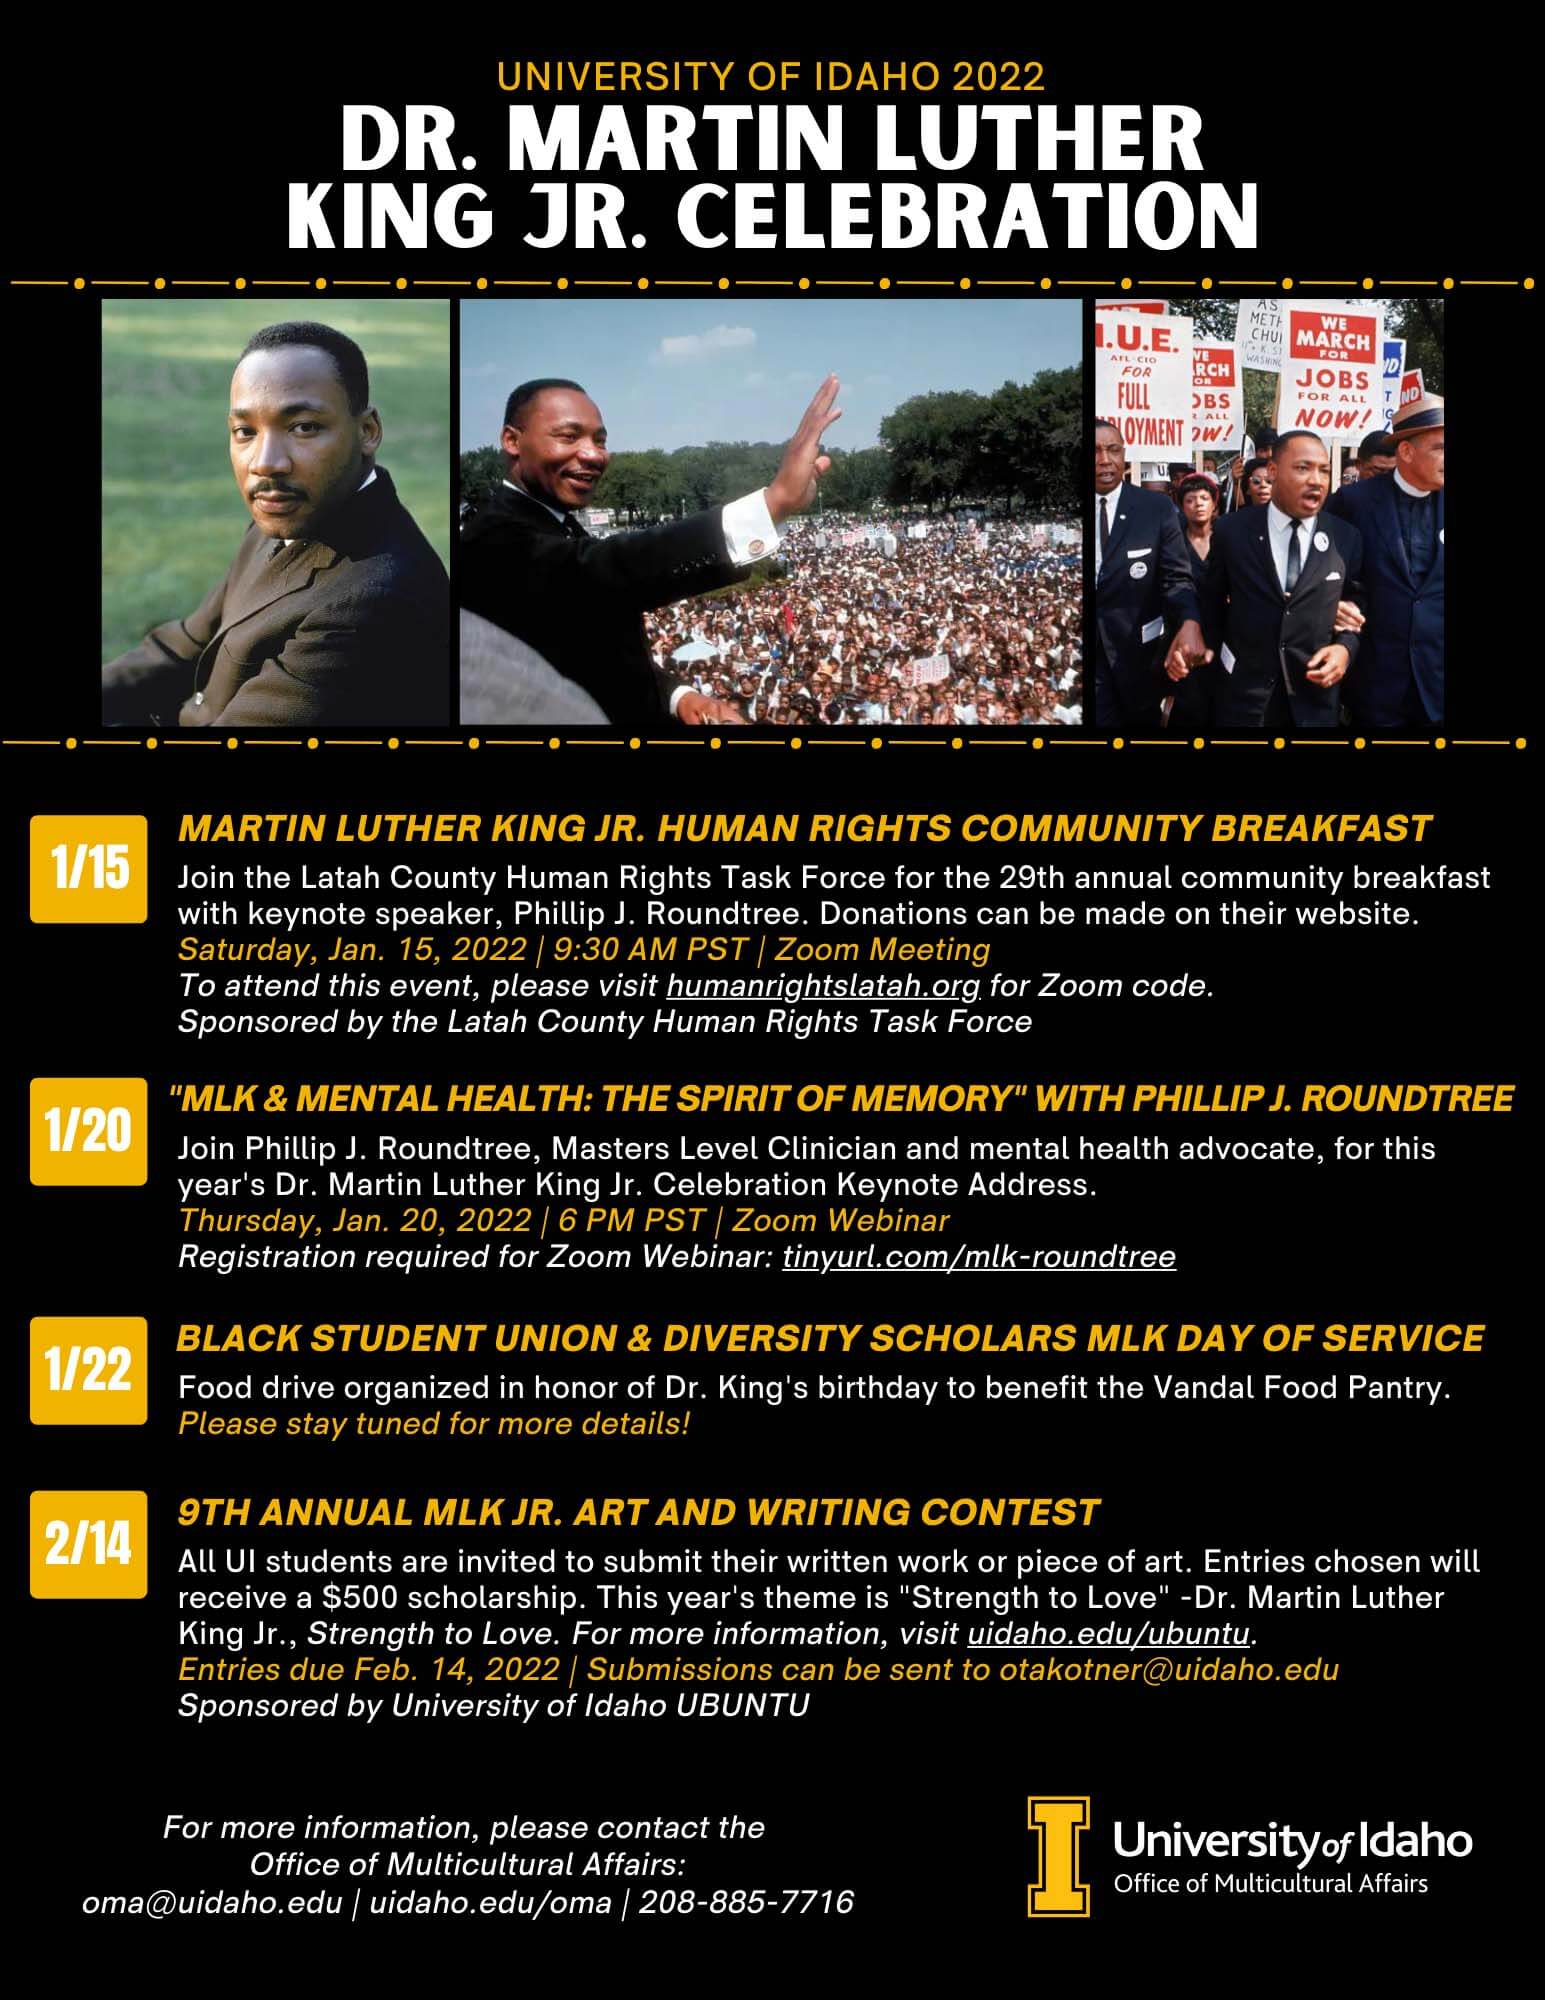 Martin Luther King Jr. Day 2022 Celebration Events Schedule